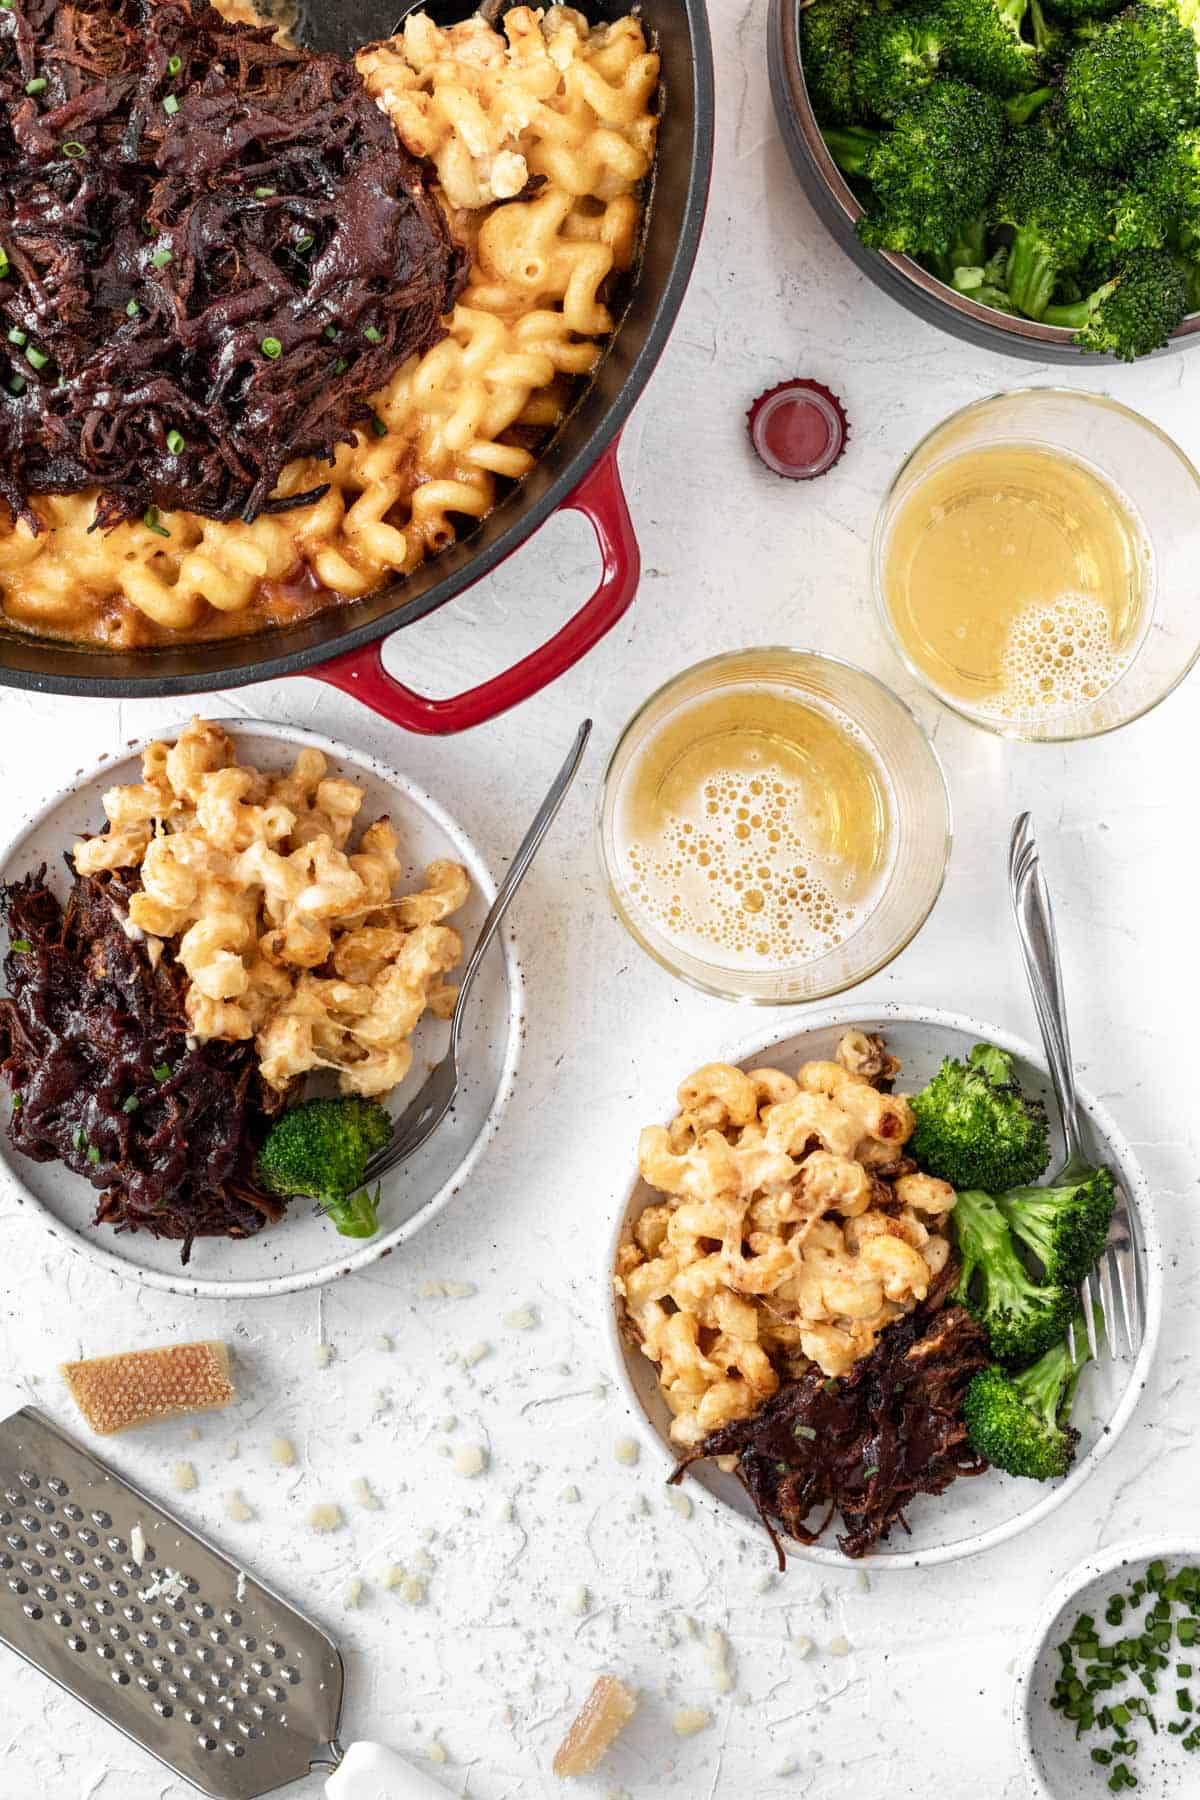 Creamy cheddar baked brisket mac and cheese served on two small plates with a side of broccoli and two glasses of beer.